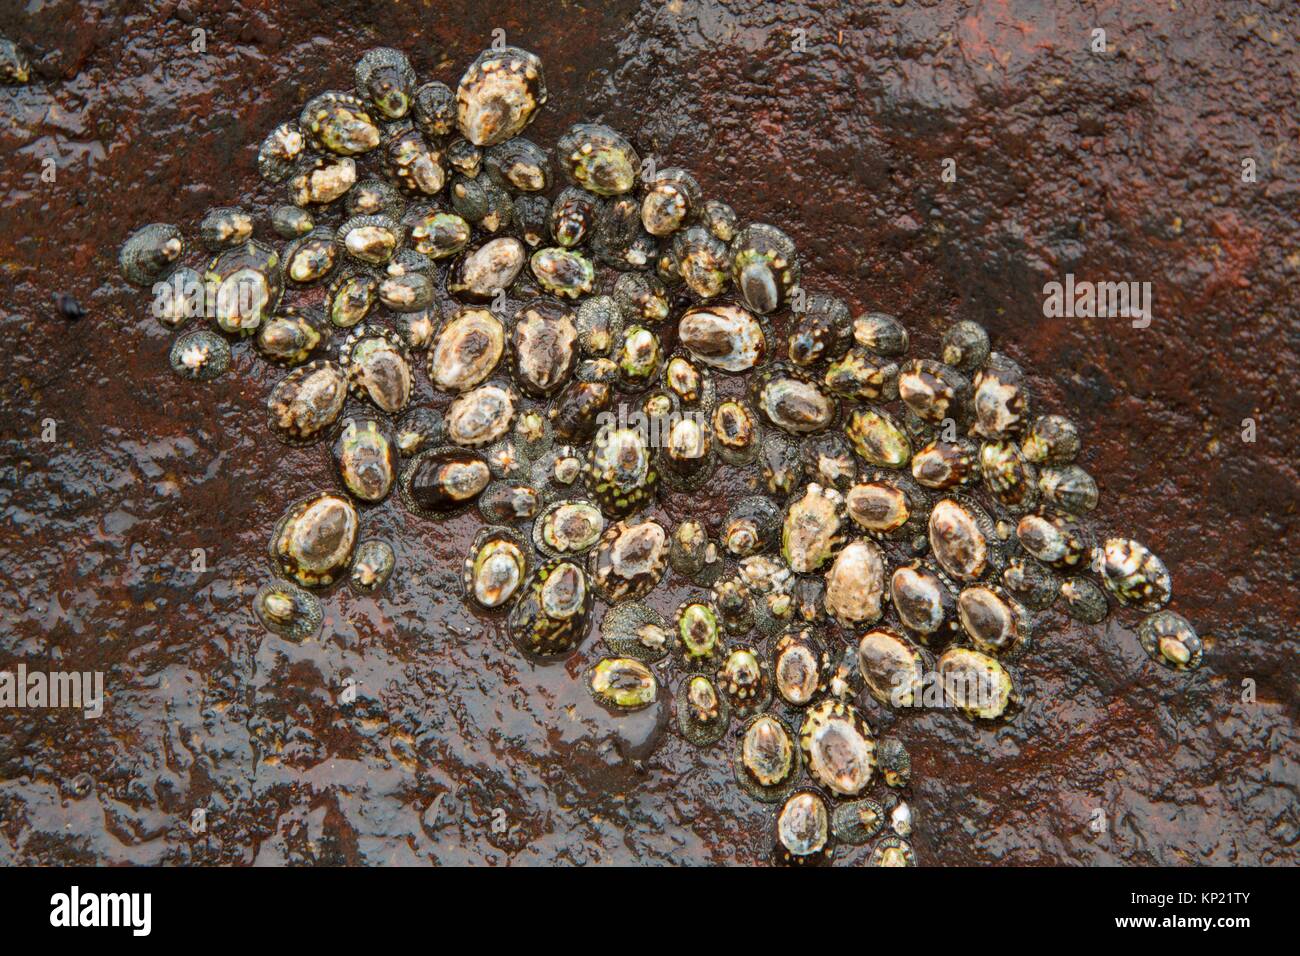 Limpets, Yachats State Park, Oregon. Stock Photo